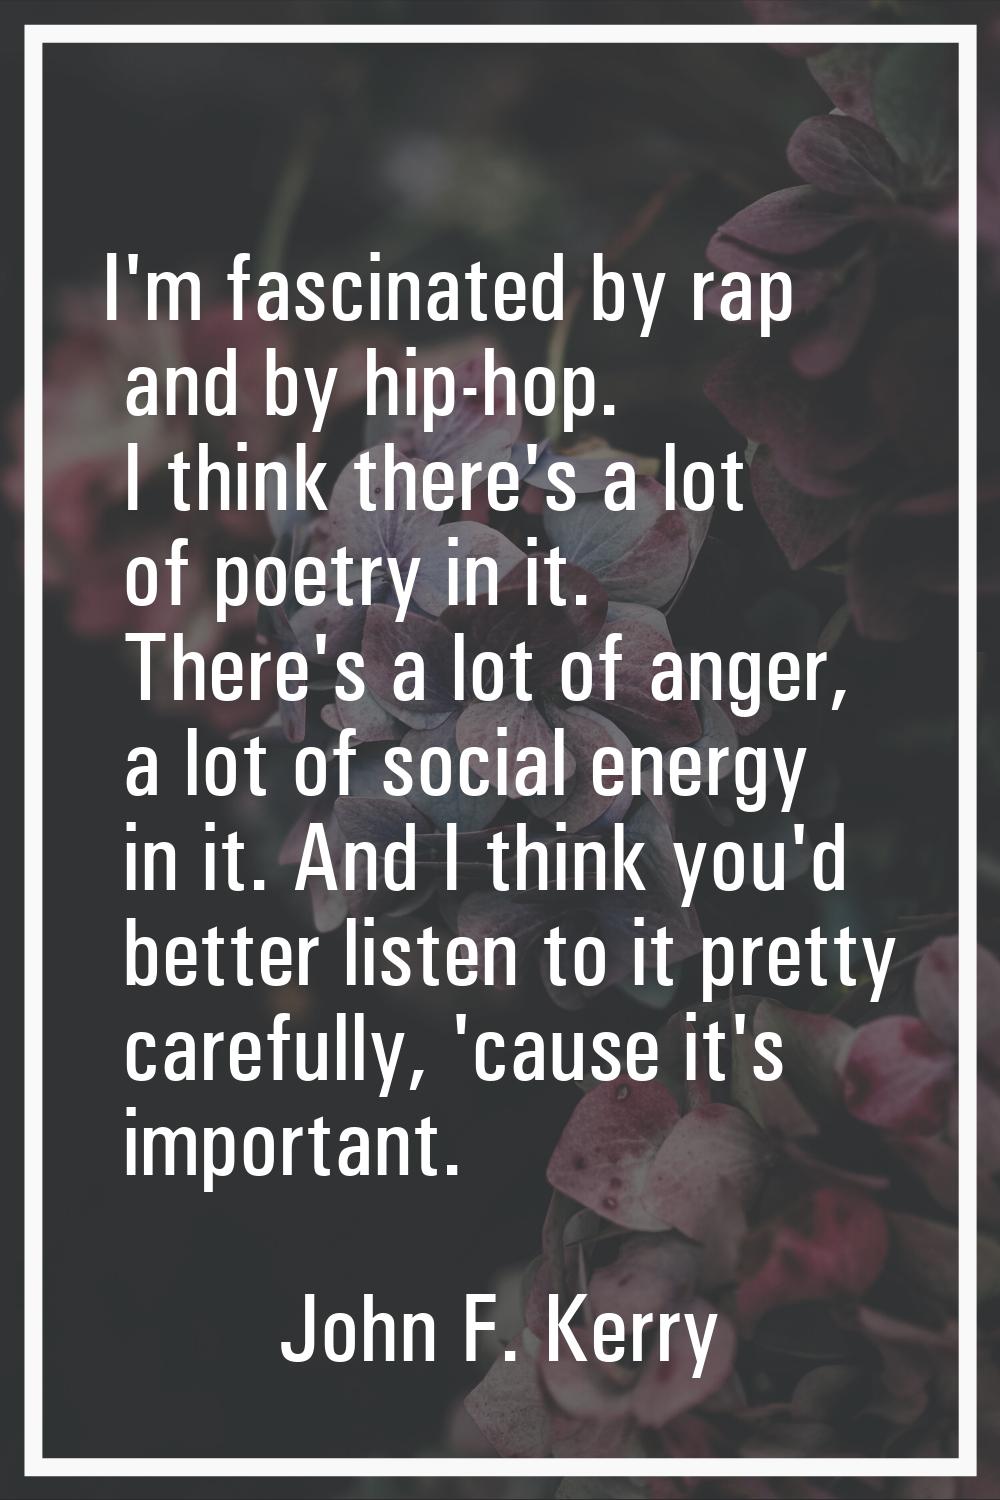 I'm fascinated by rap and by hip-hop. I think there's a lot of poetry in it. There's a lot of anger